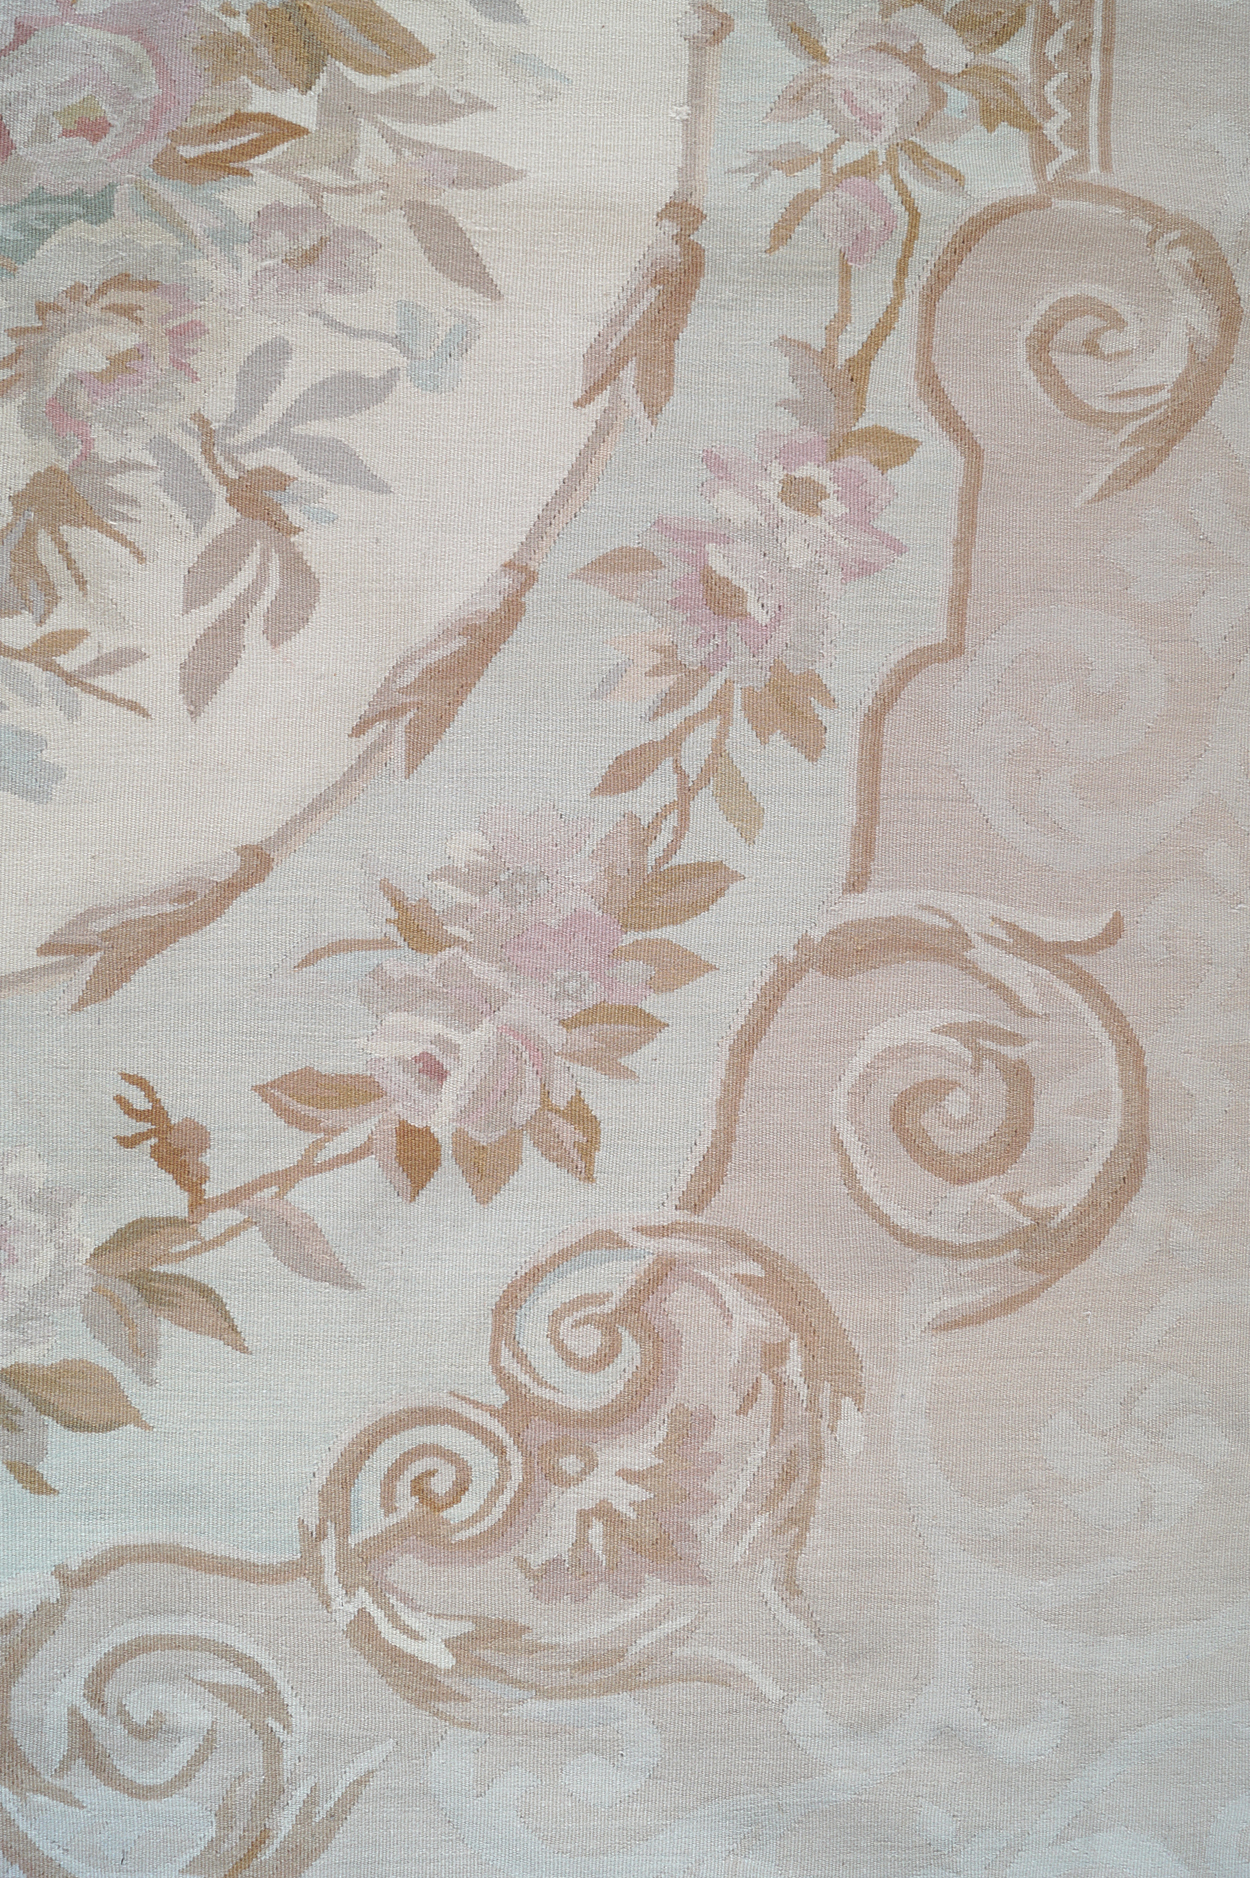 FRENCH AUBUSSON CARPET with ivory rosette medallion 355 x 276 cm. Worldwide shipping available. - Image 7 of 8